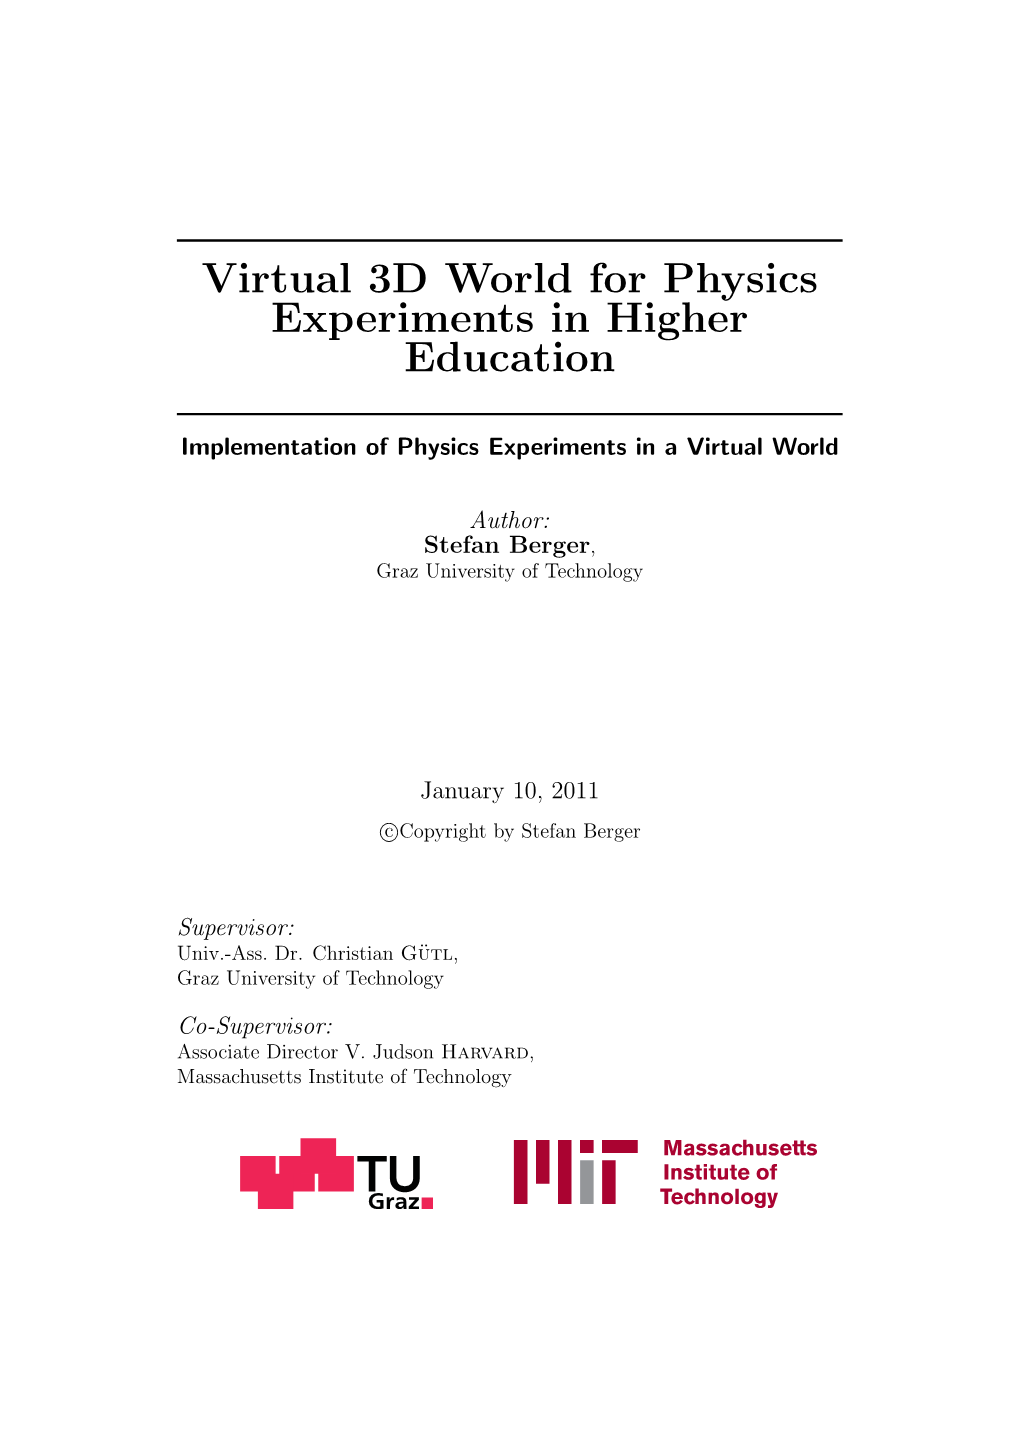 Virtual 3D World for Physics Experiments in Higher Education